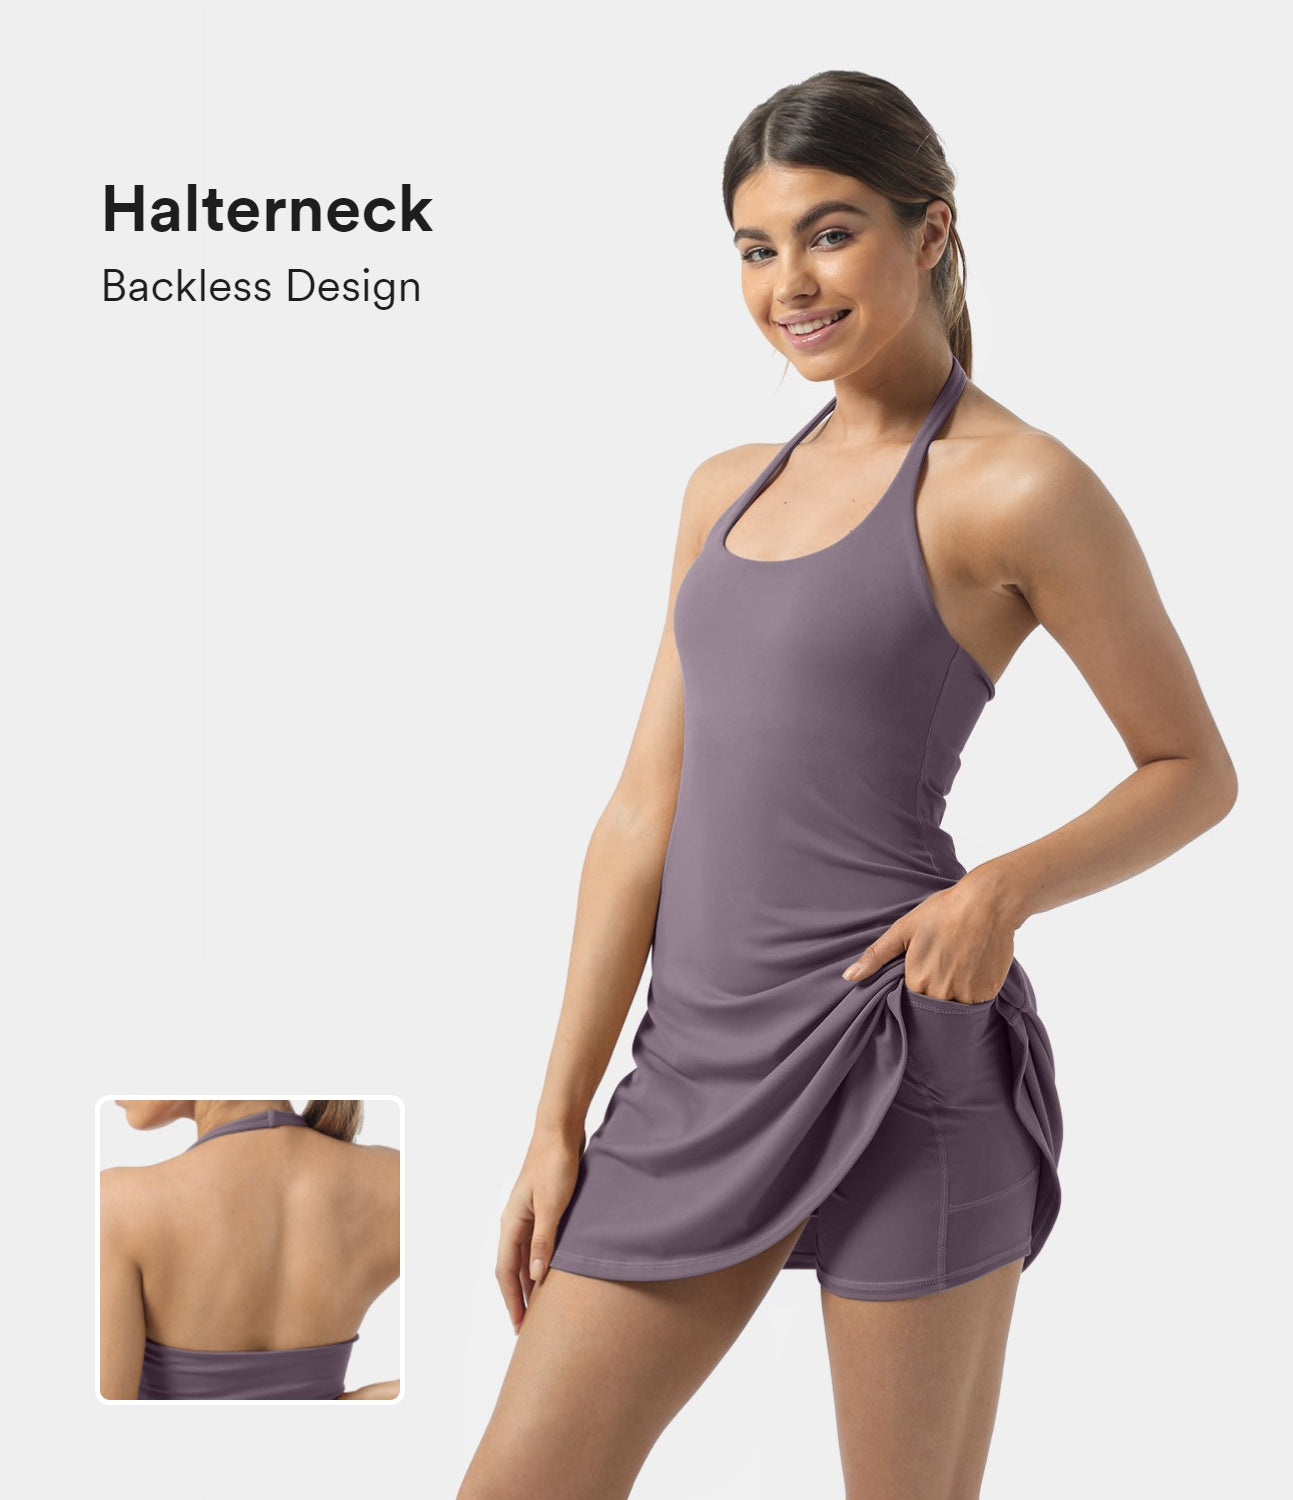 

Halara Everyday Cloudfulв„ў Fabric Backless 2-in-1 Activity Dress-Laugh Workout Dress - Lavender